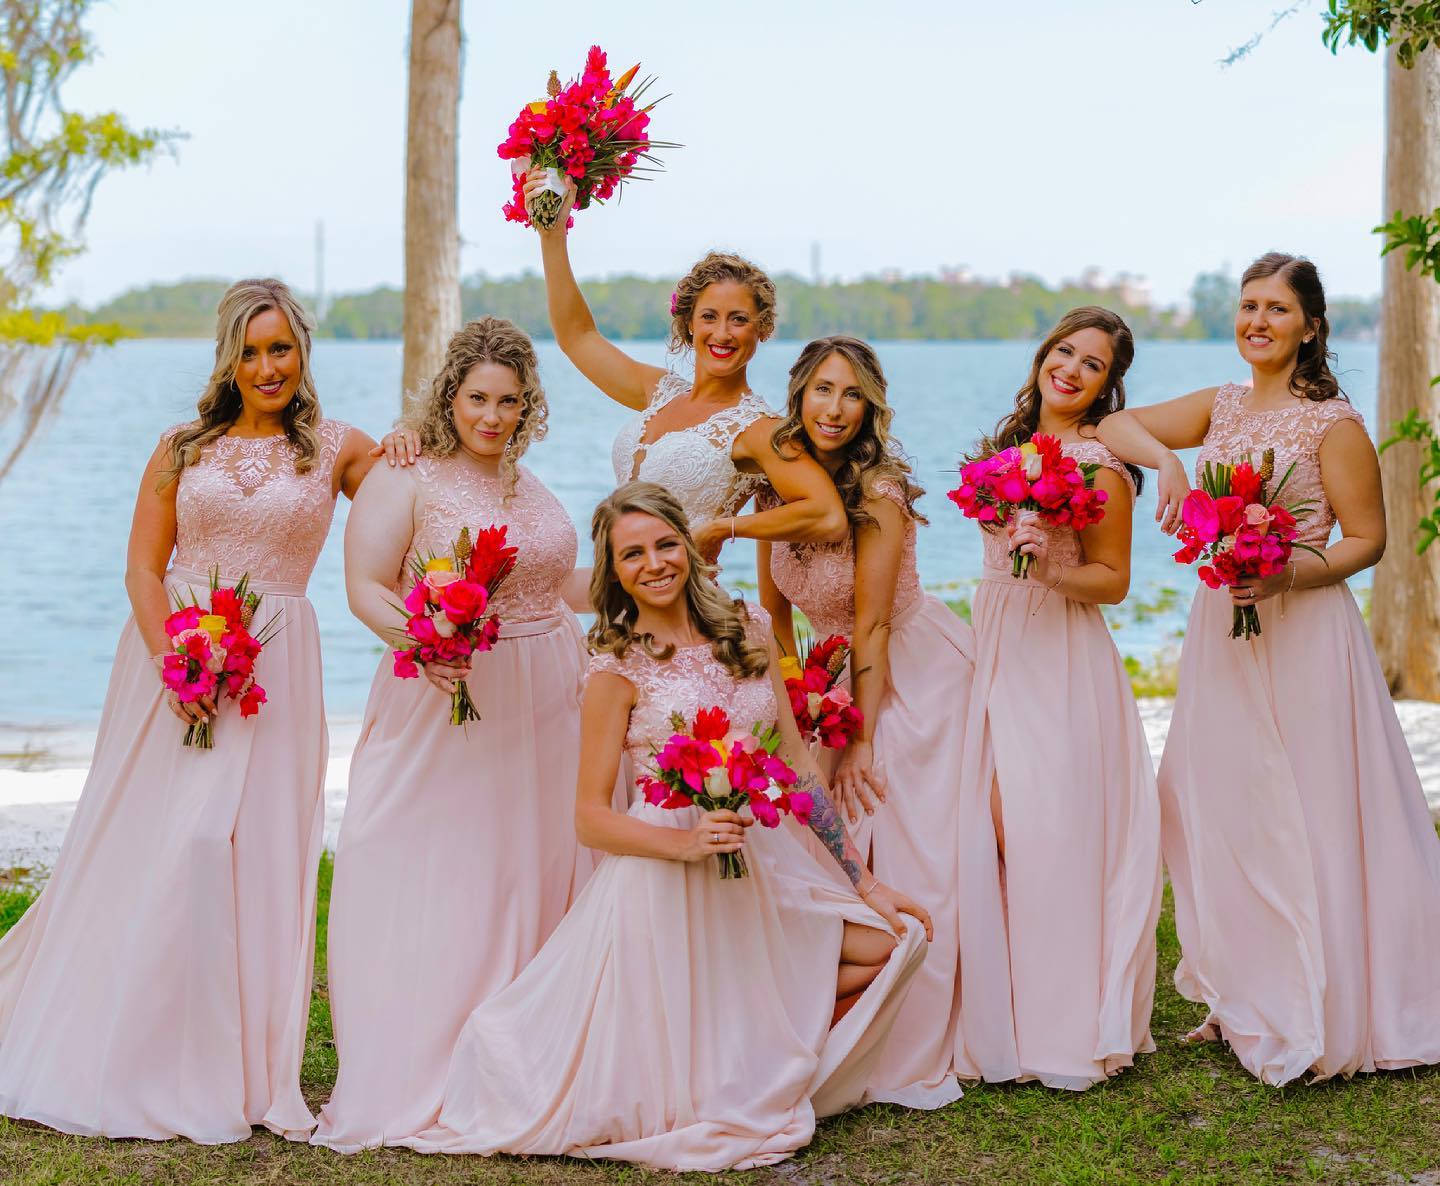 A Bride With Bridesmaids in Pink With Colorful Flowers